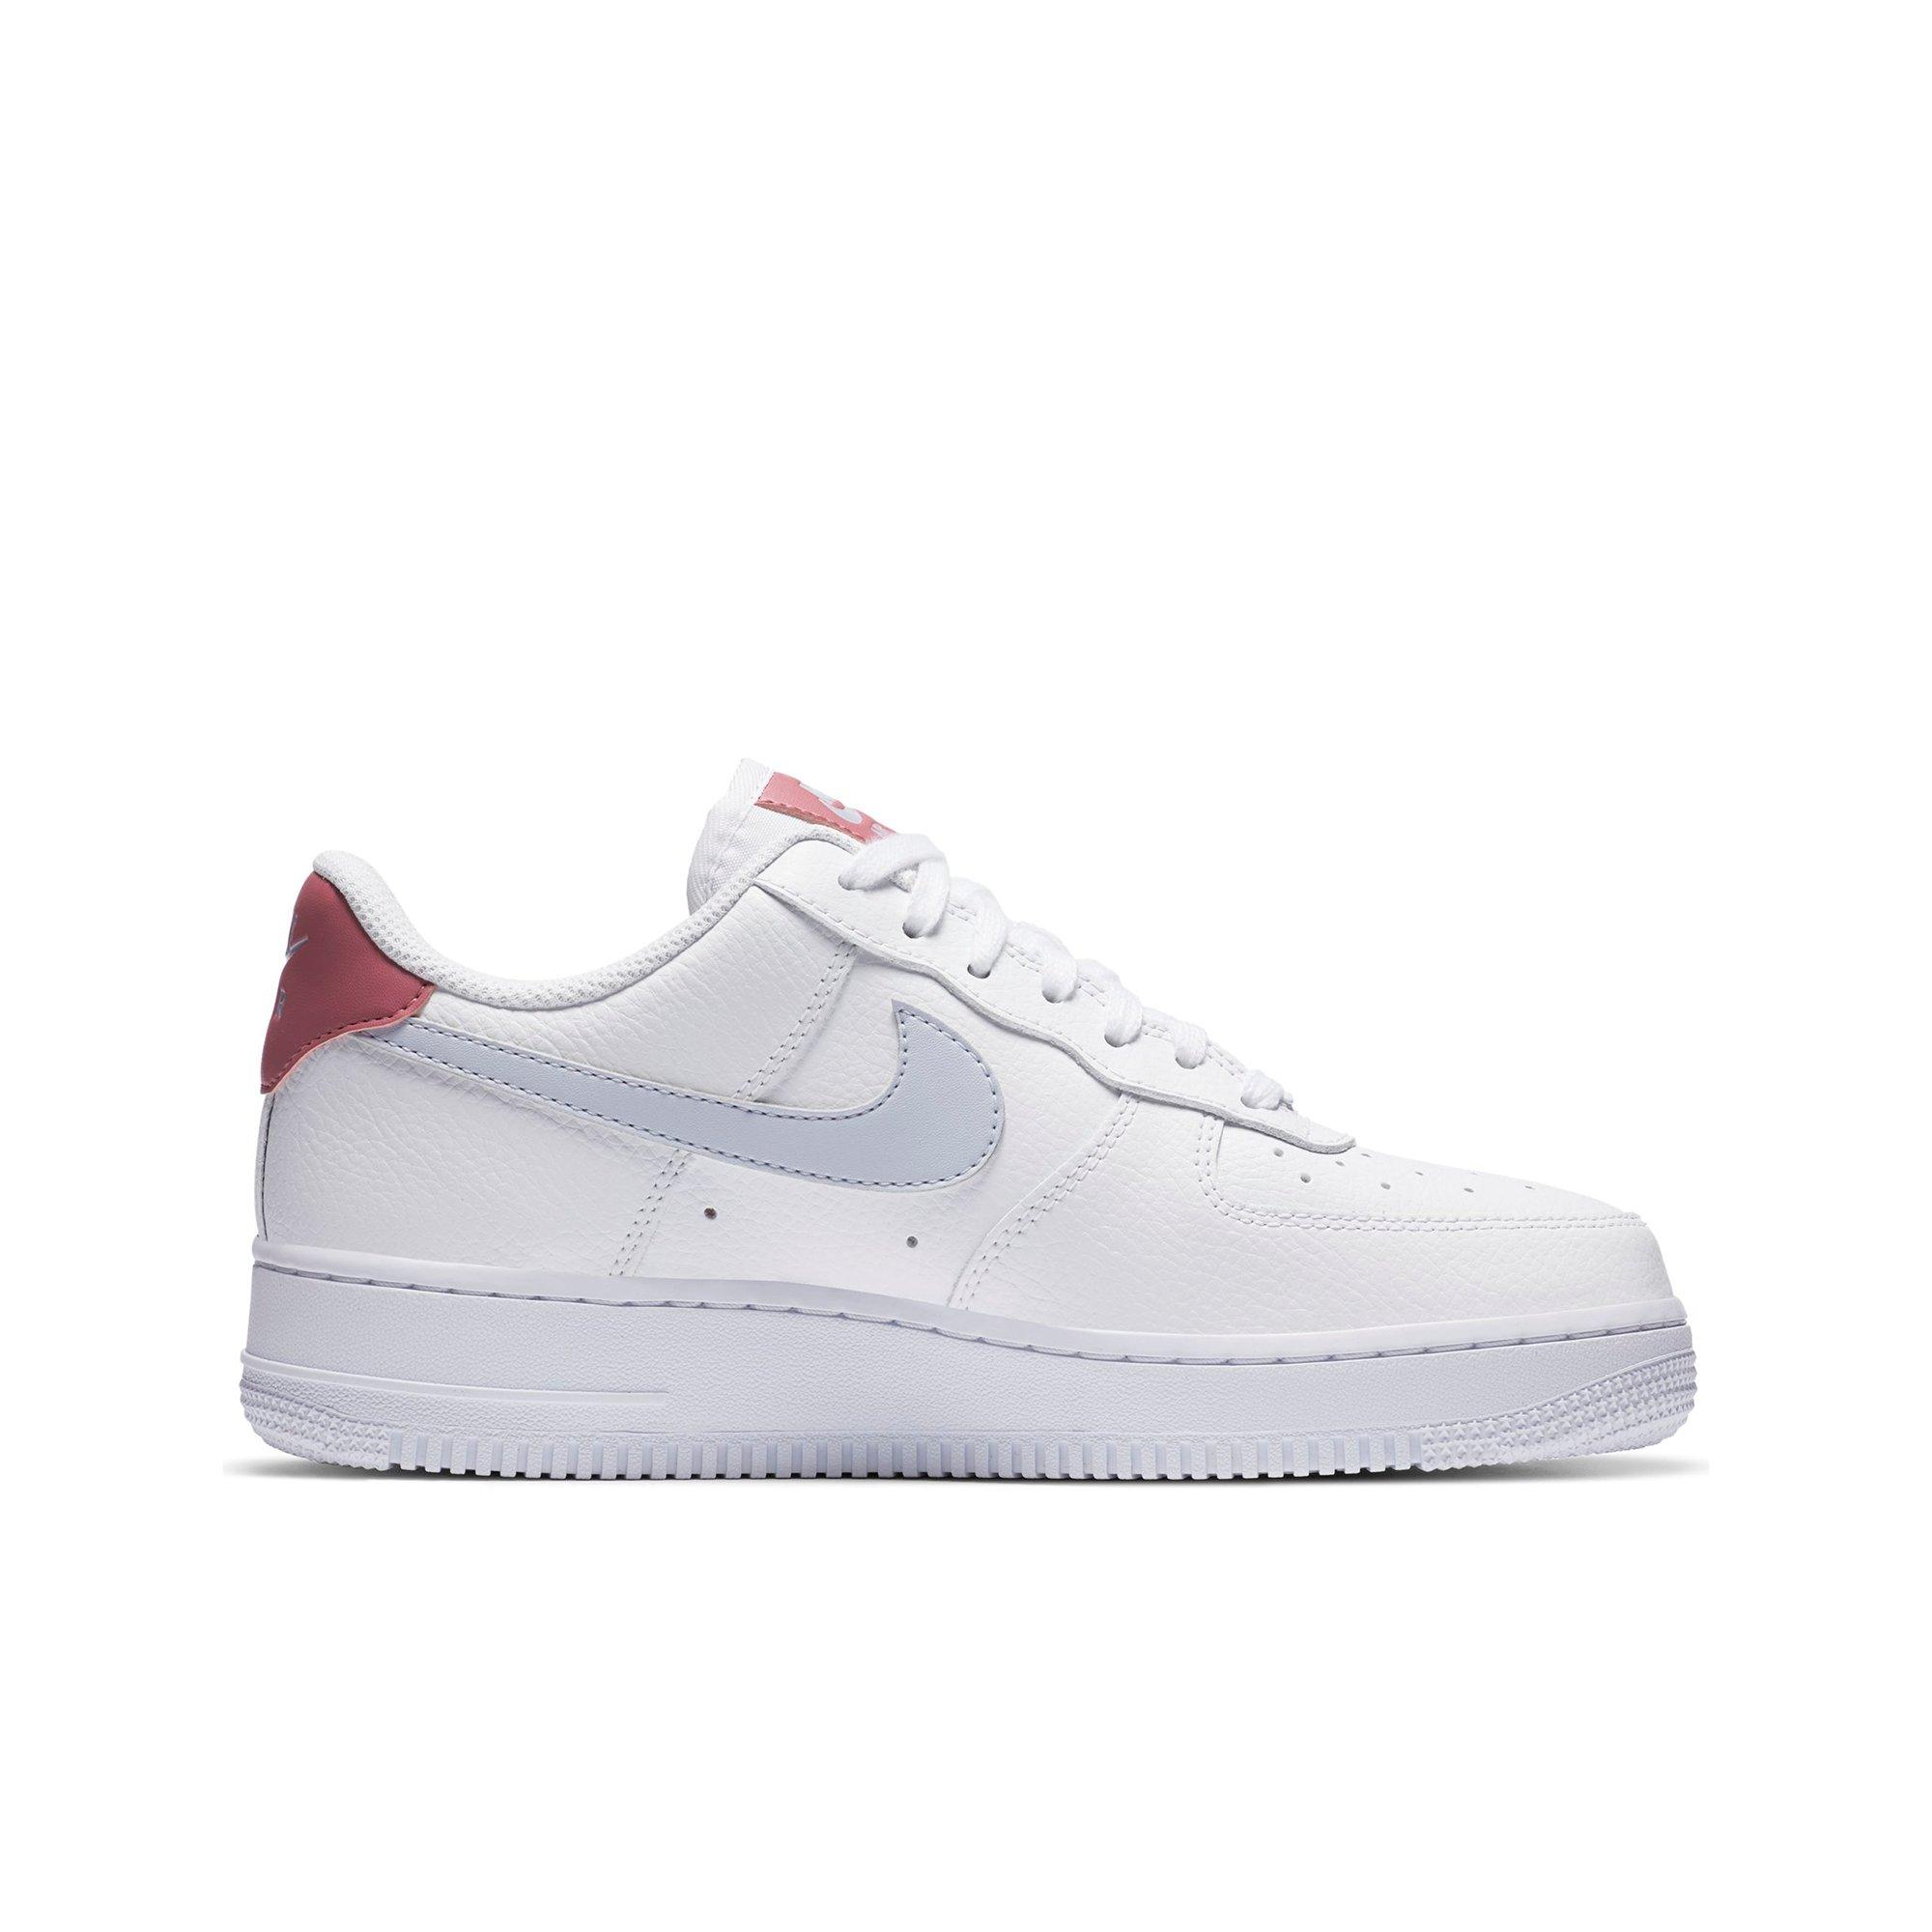 air force 1 white blue pink